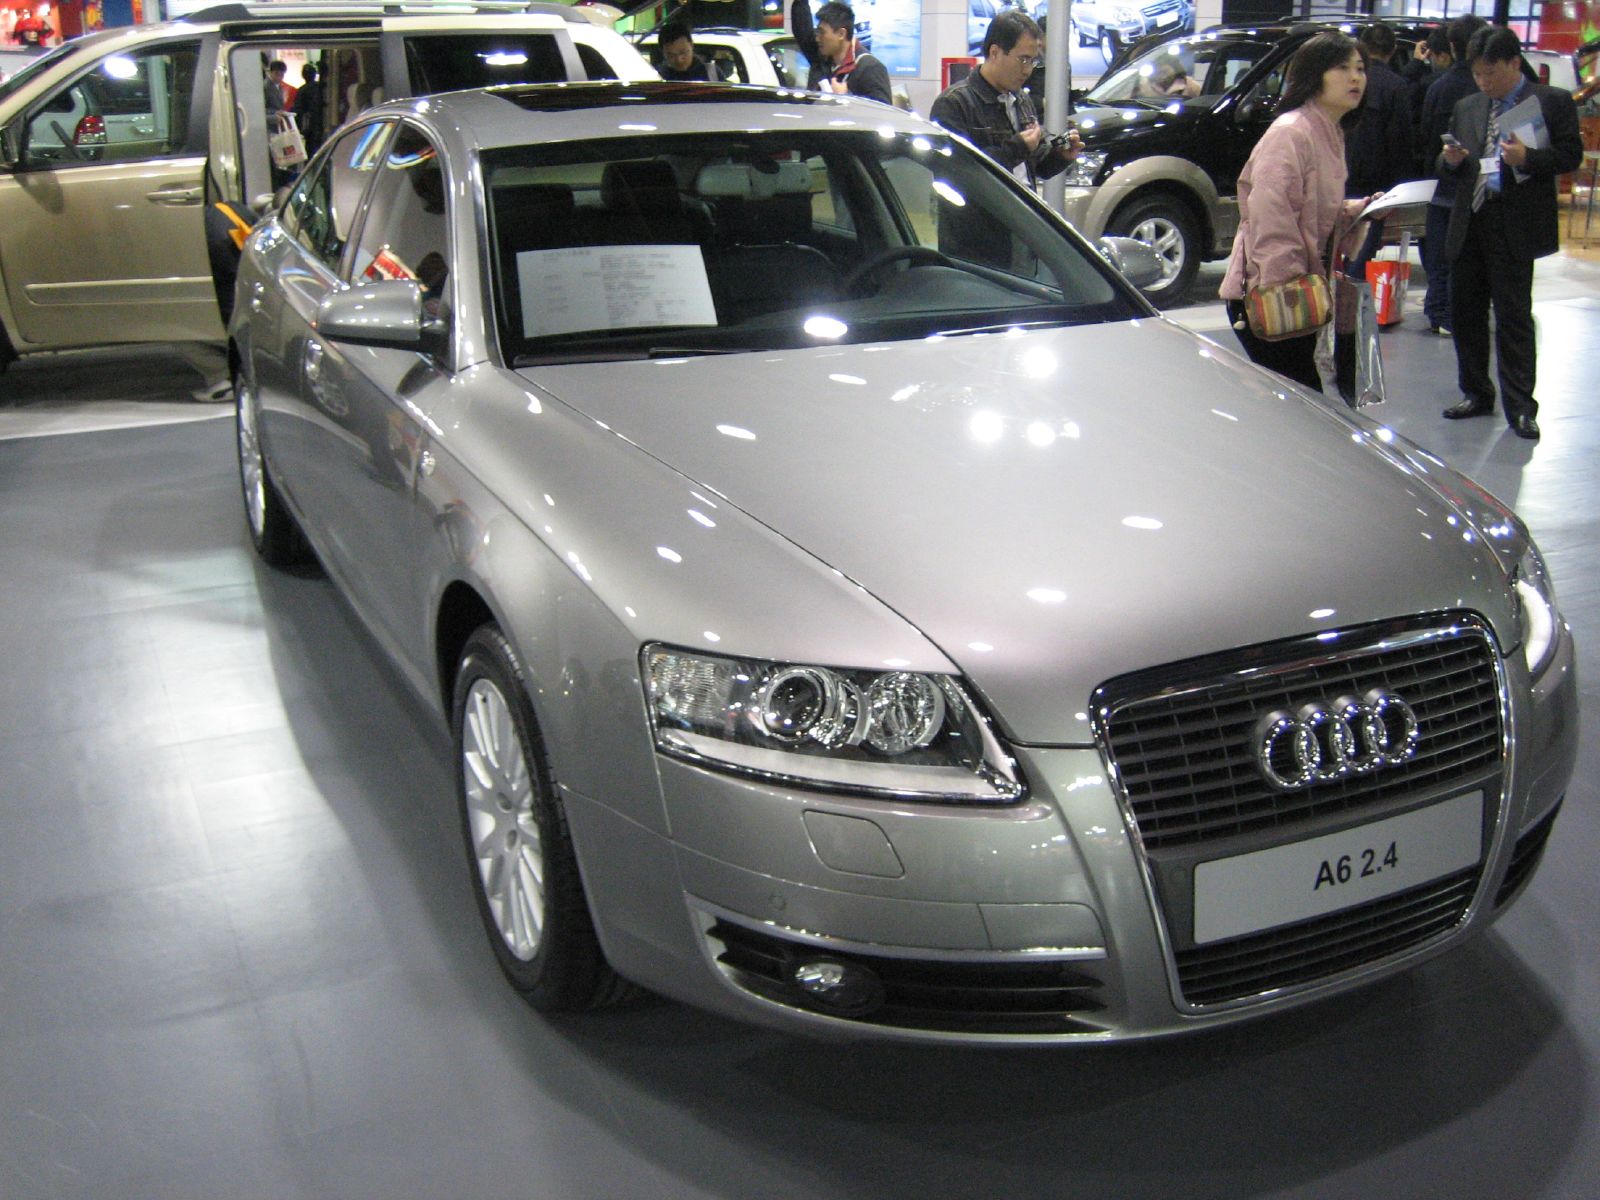 Audi A6 | Flickr - Photo Sharing!